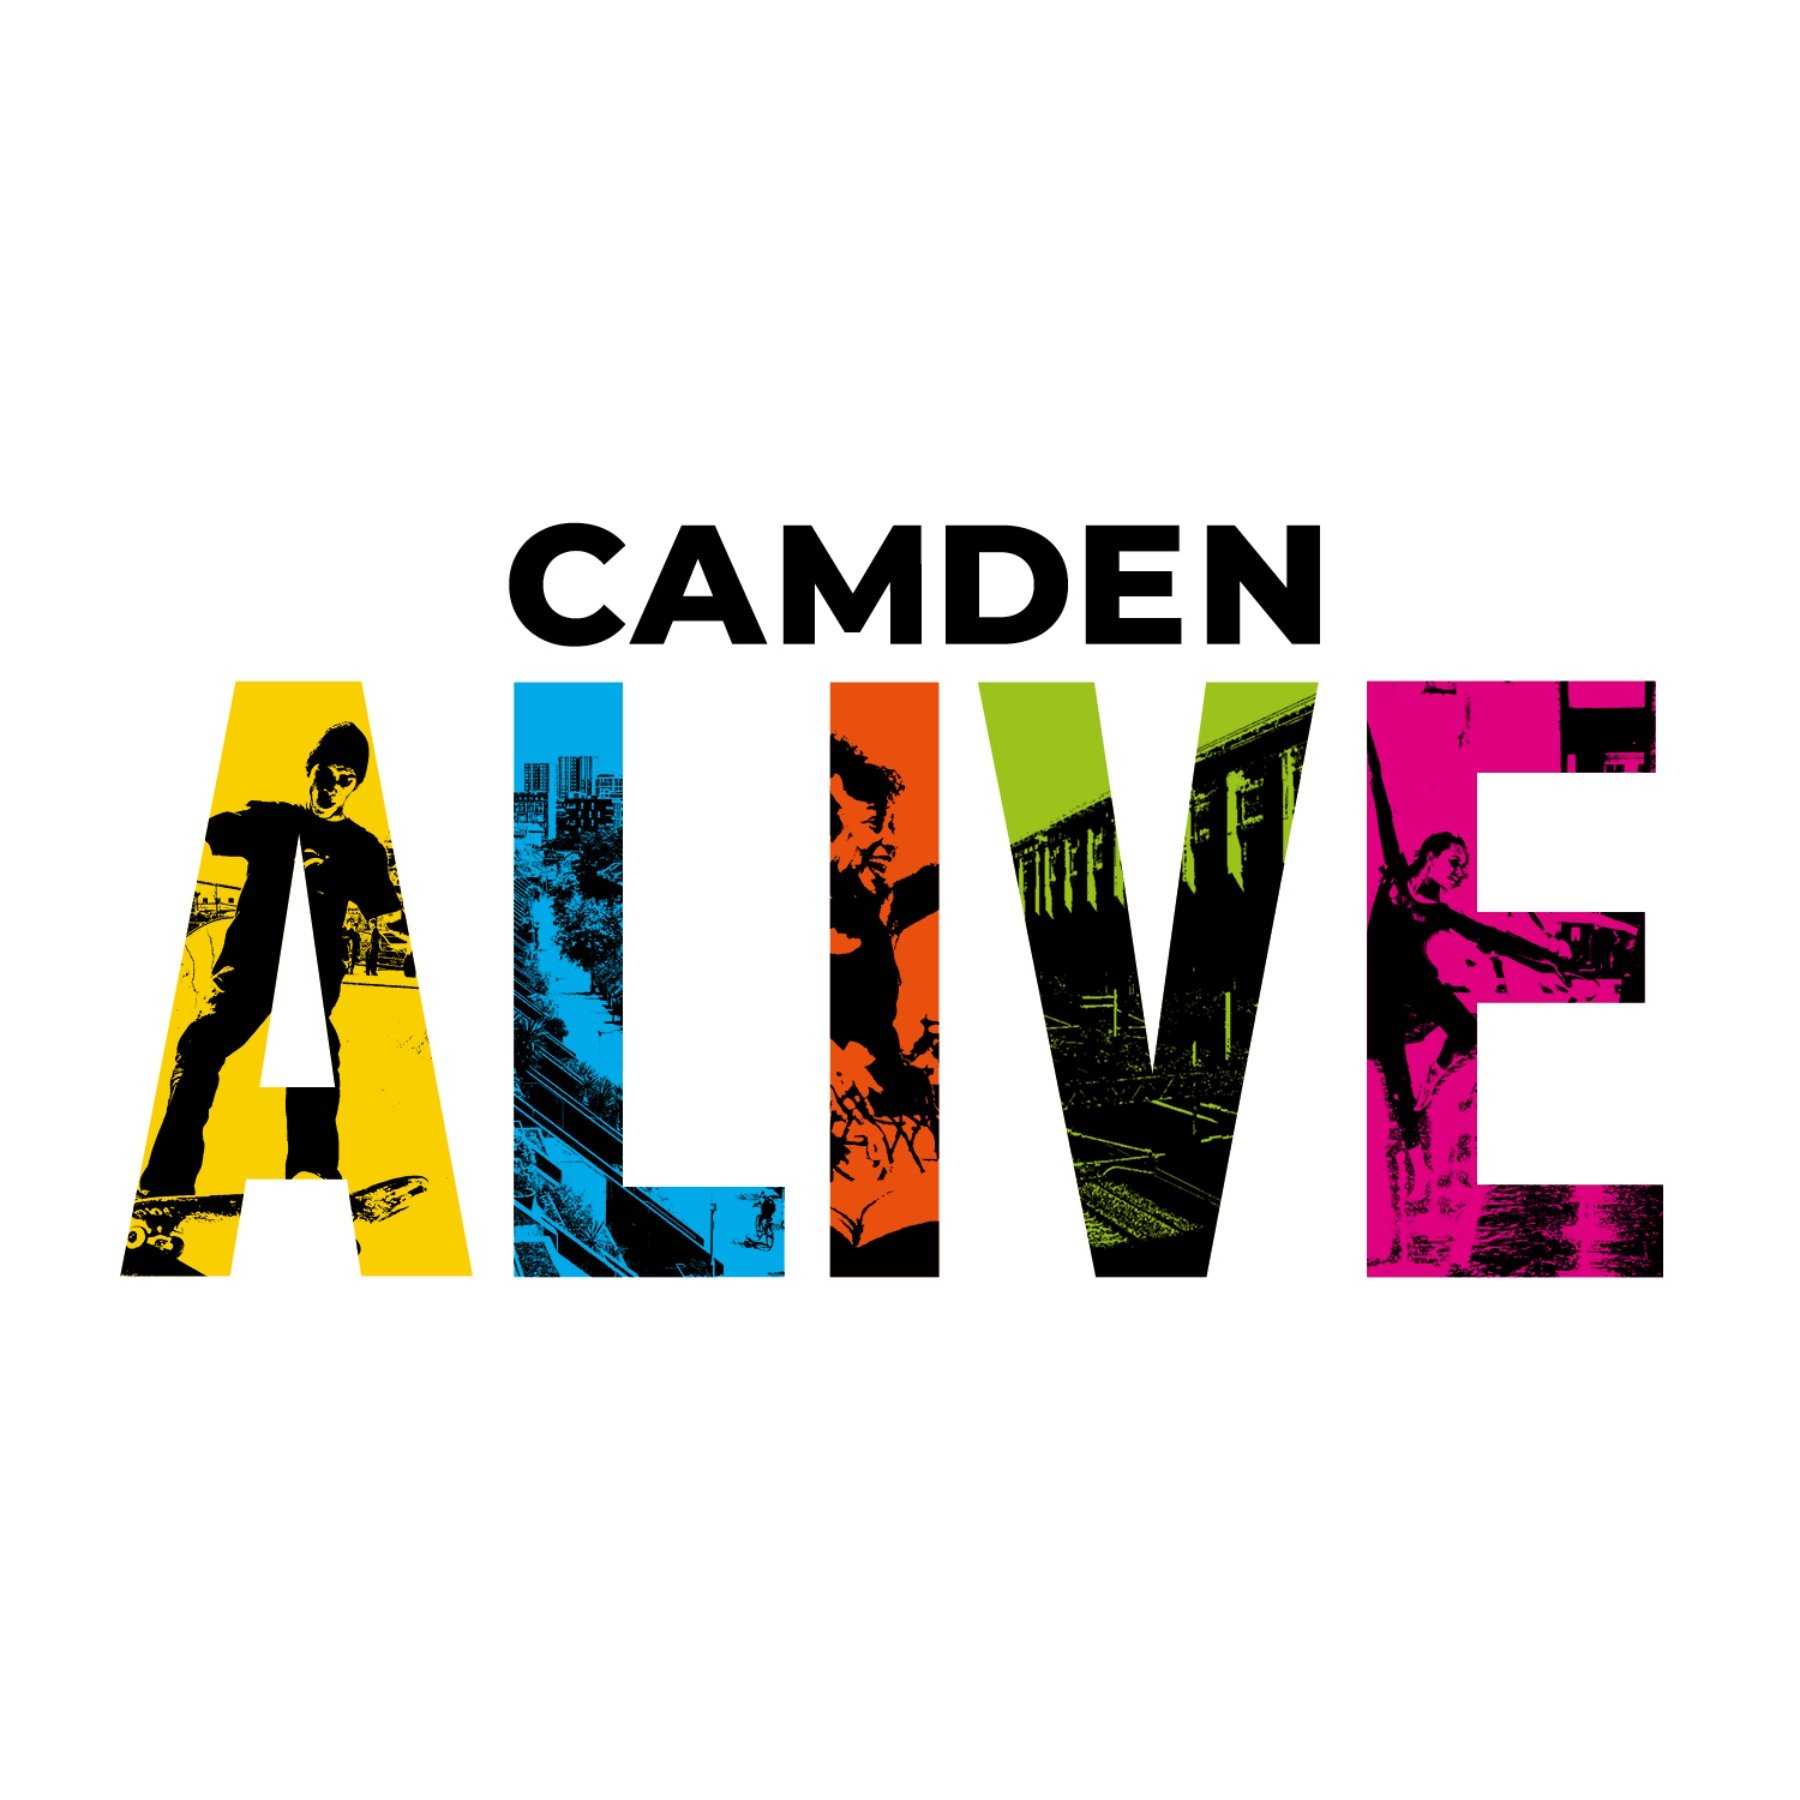 Sharing our diverse heritage through creativity; capturing the sights, sounds and spirit of Camden #CamdenAlive19 #OurCulture